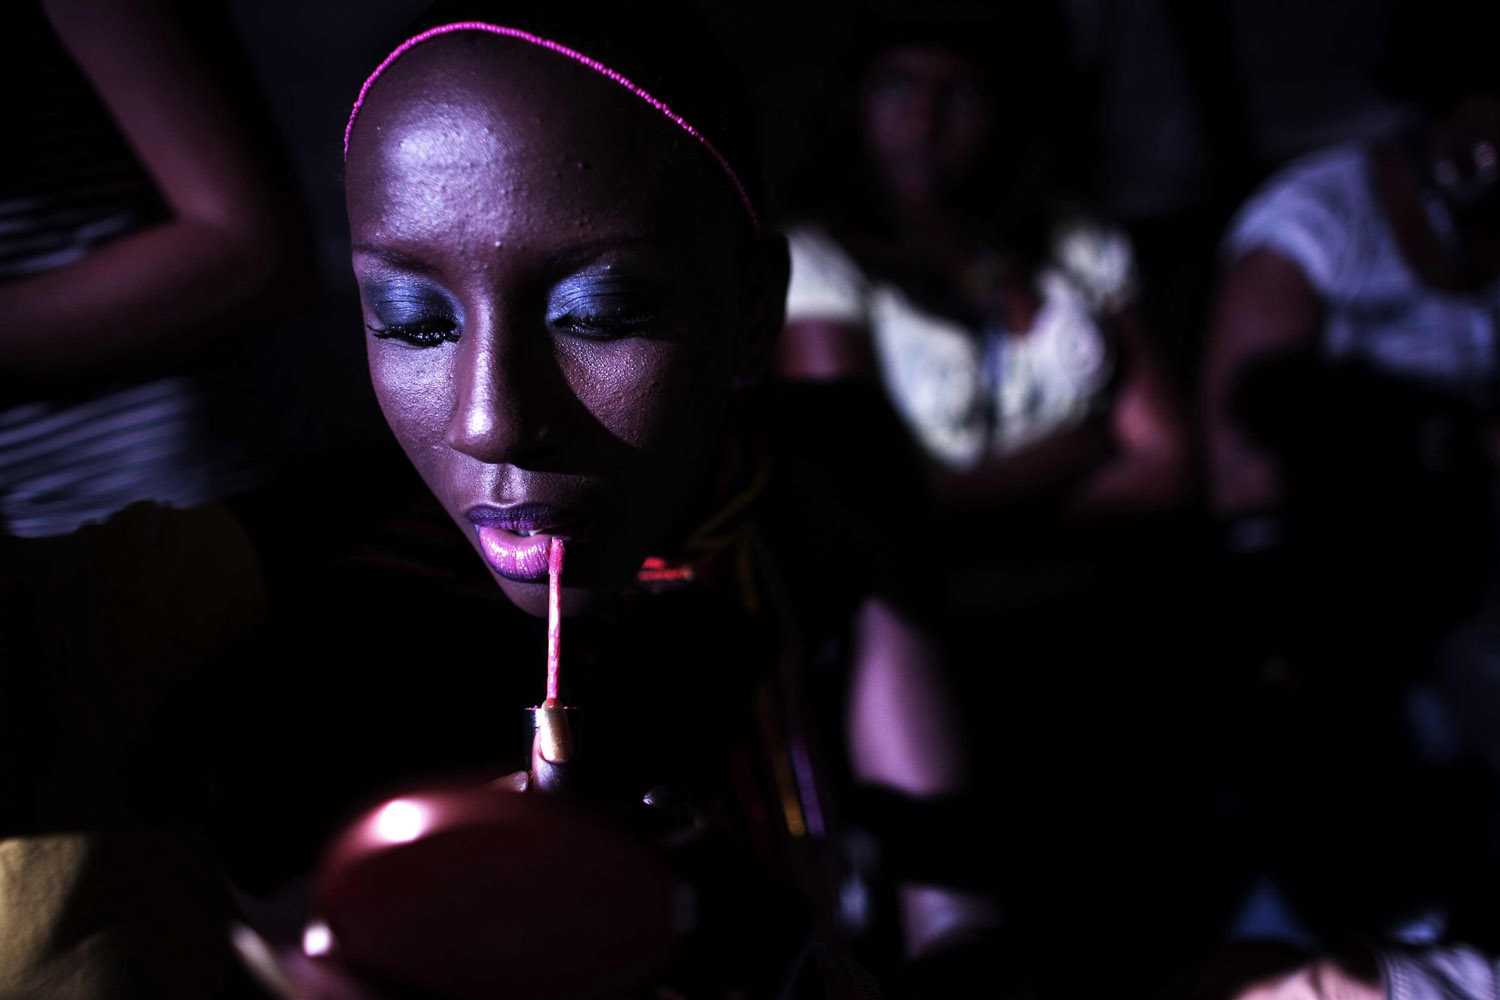 A model puts on make-up backstage during the 10th anniversary of Dakar Fashion Week